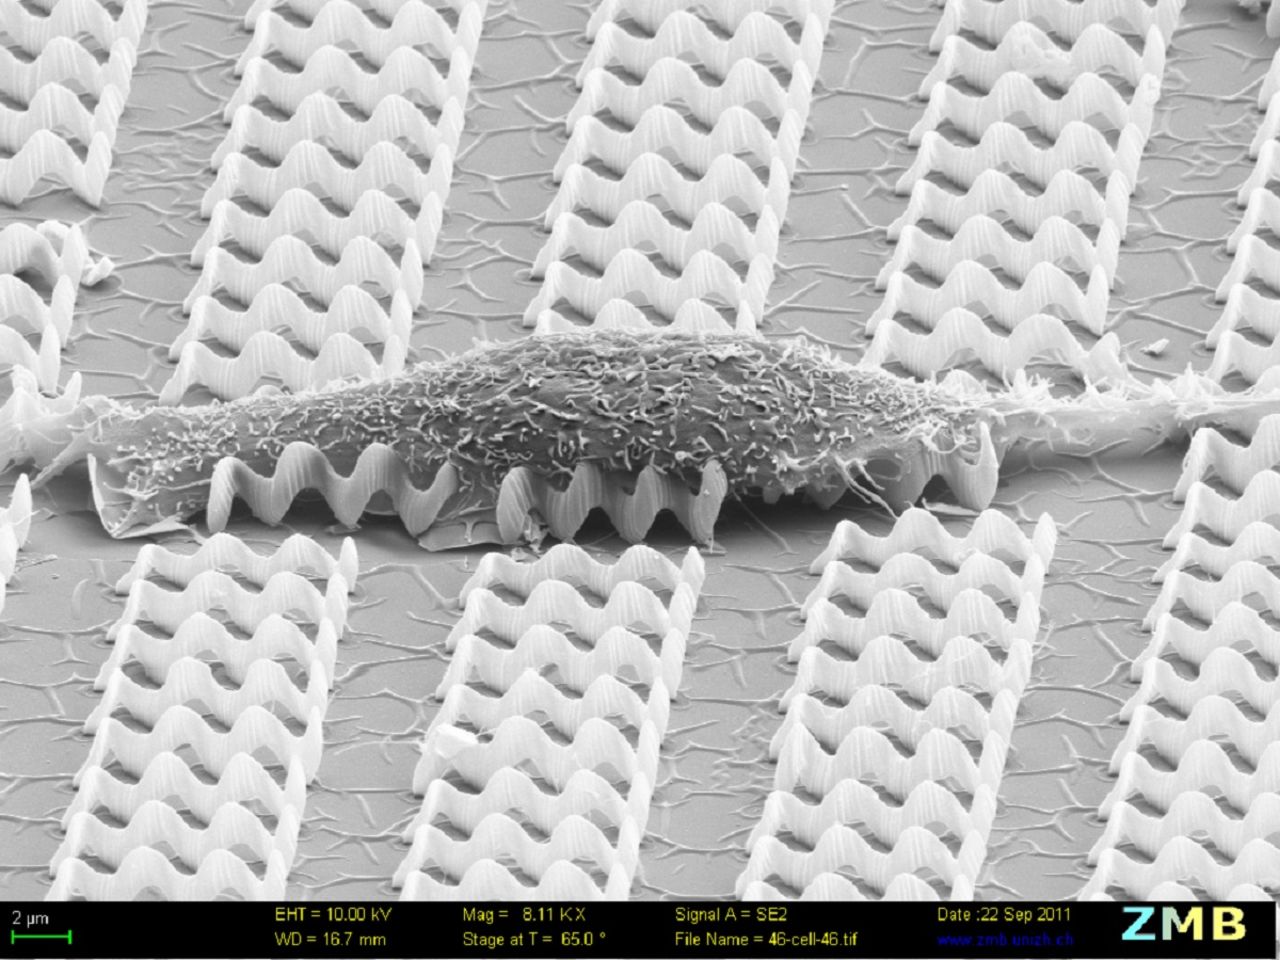 A muscle cell resting on a bed of nanobots.